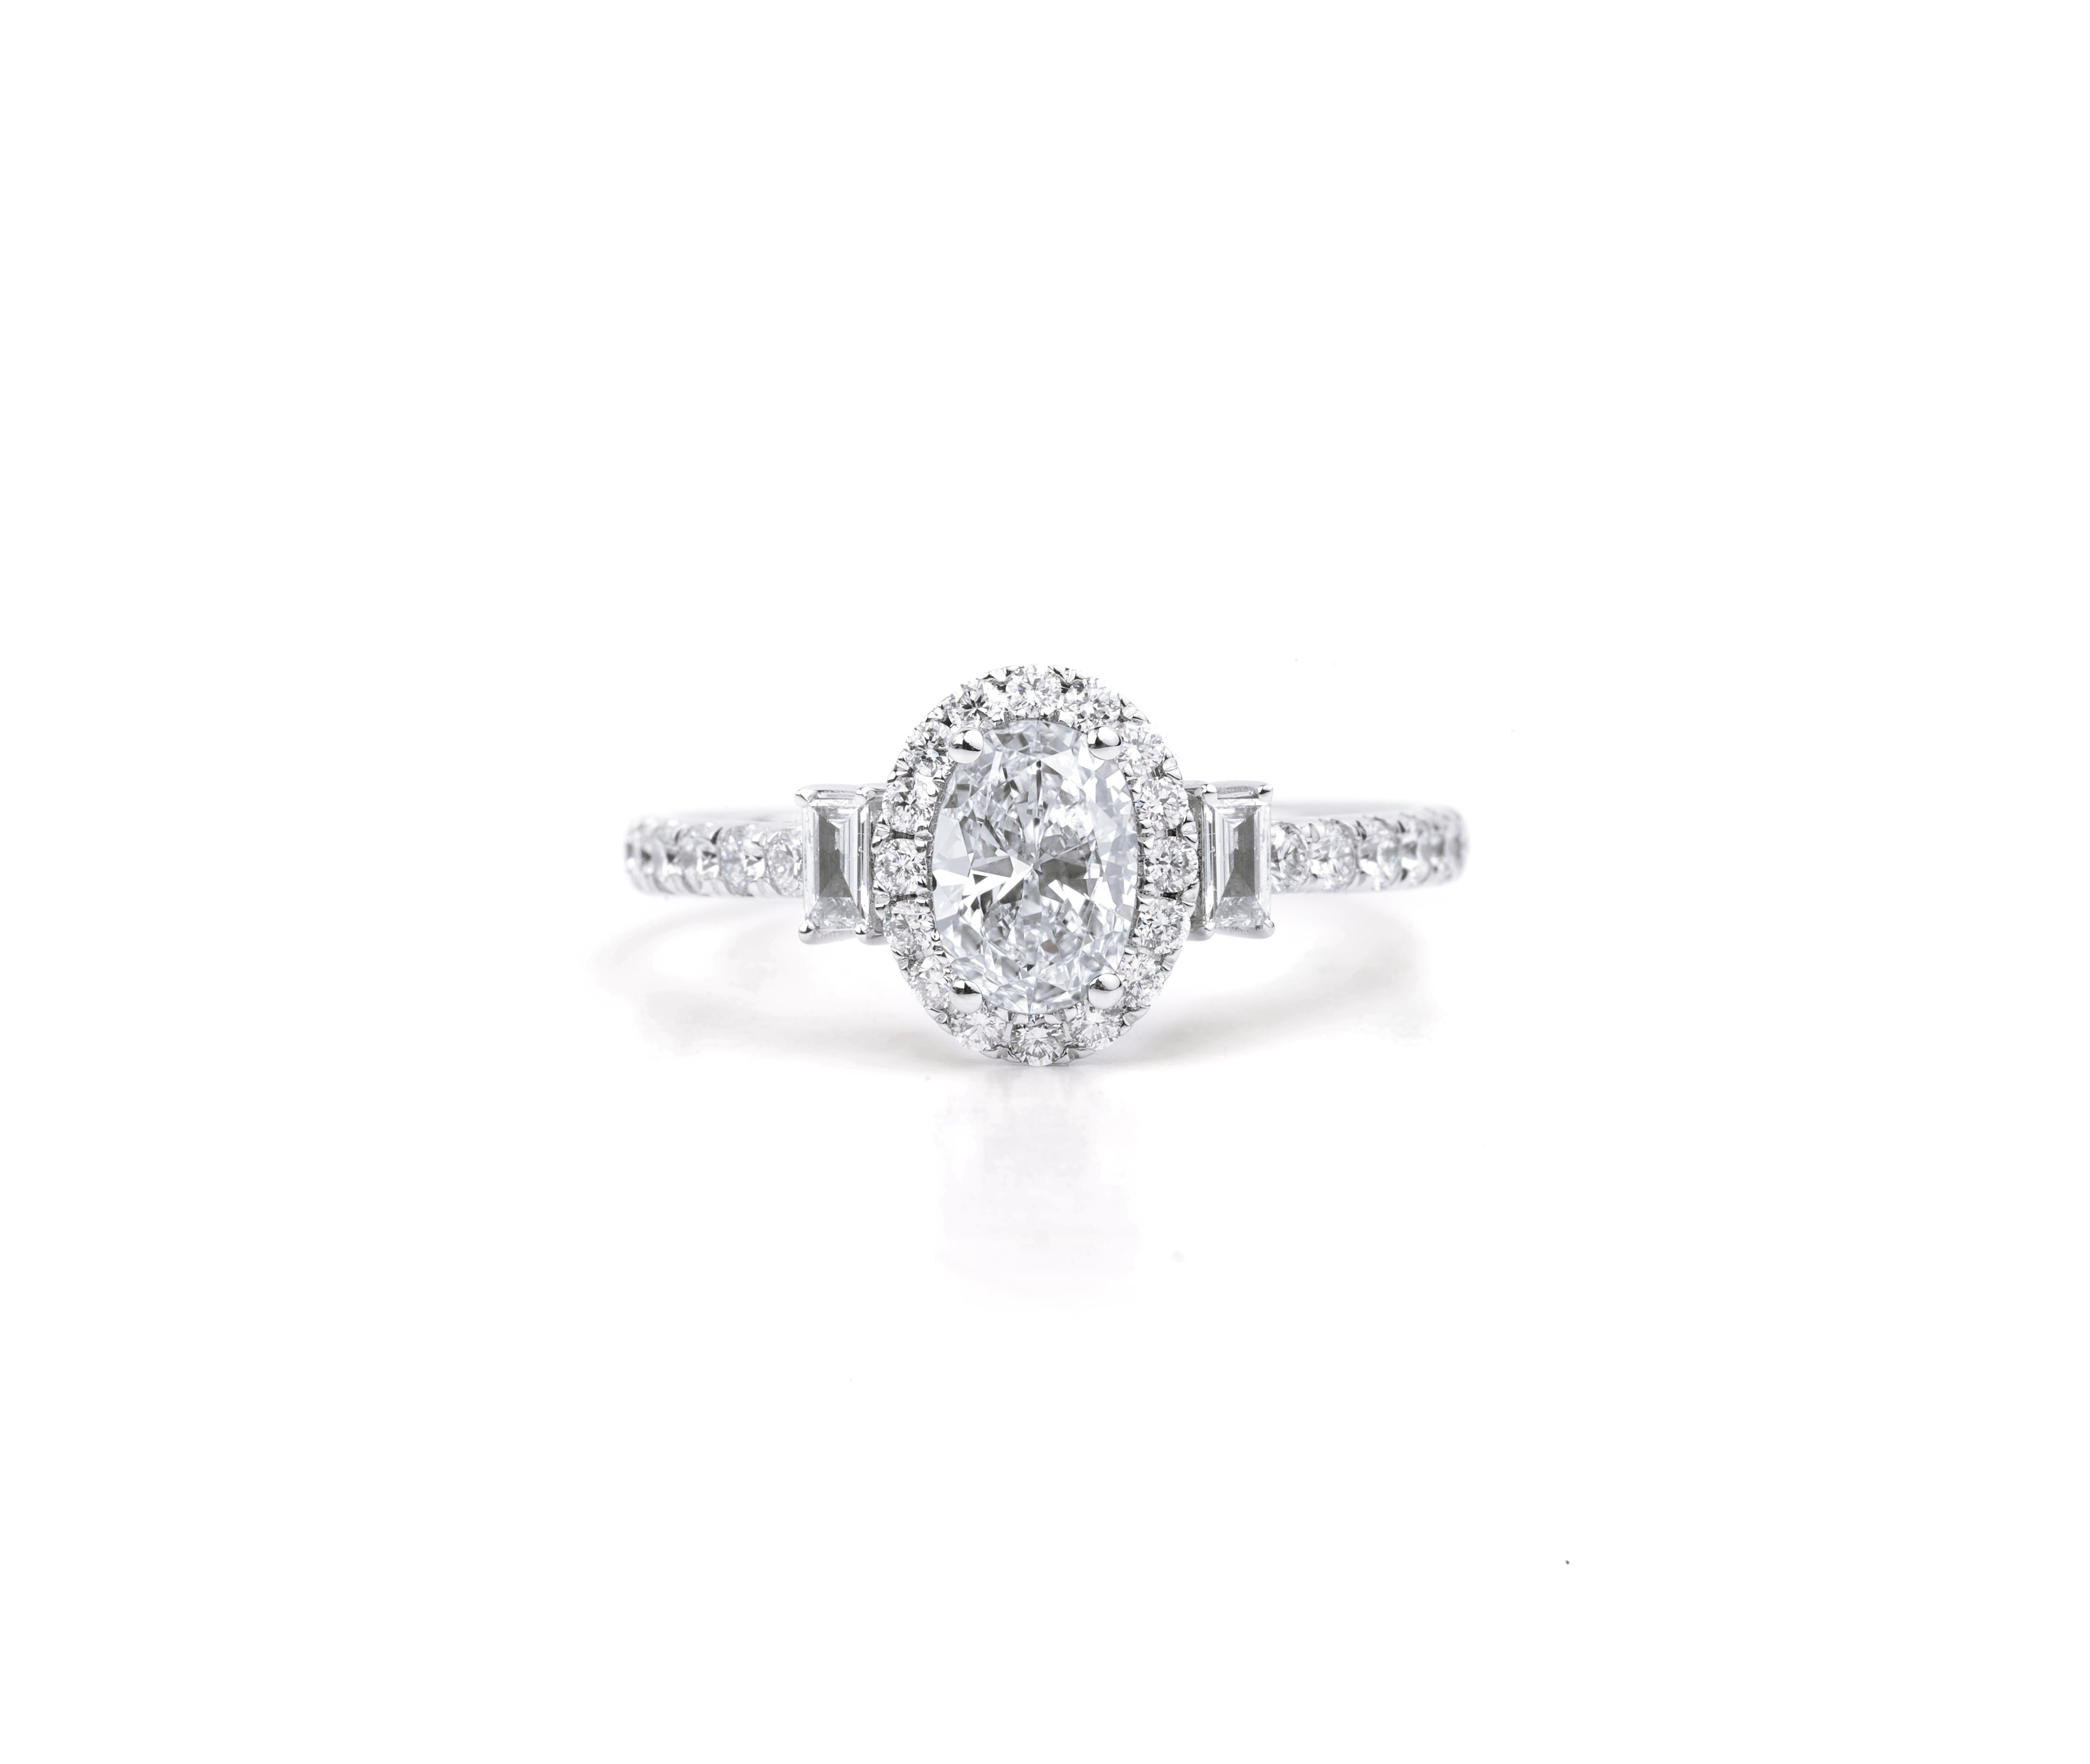 GIA Report Certified 1 carat G VS Oval Cut Diamond Engagement Cocktail Ring With Baguette Diamonds

Available in 18k white gold.

Same design can be made also with other custom gemstones per request.

Product details:

- Solid gold

- Side diamond -